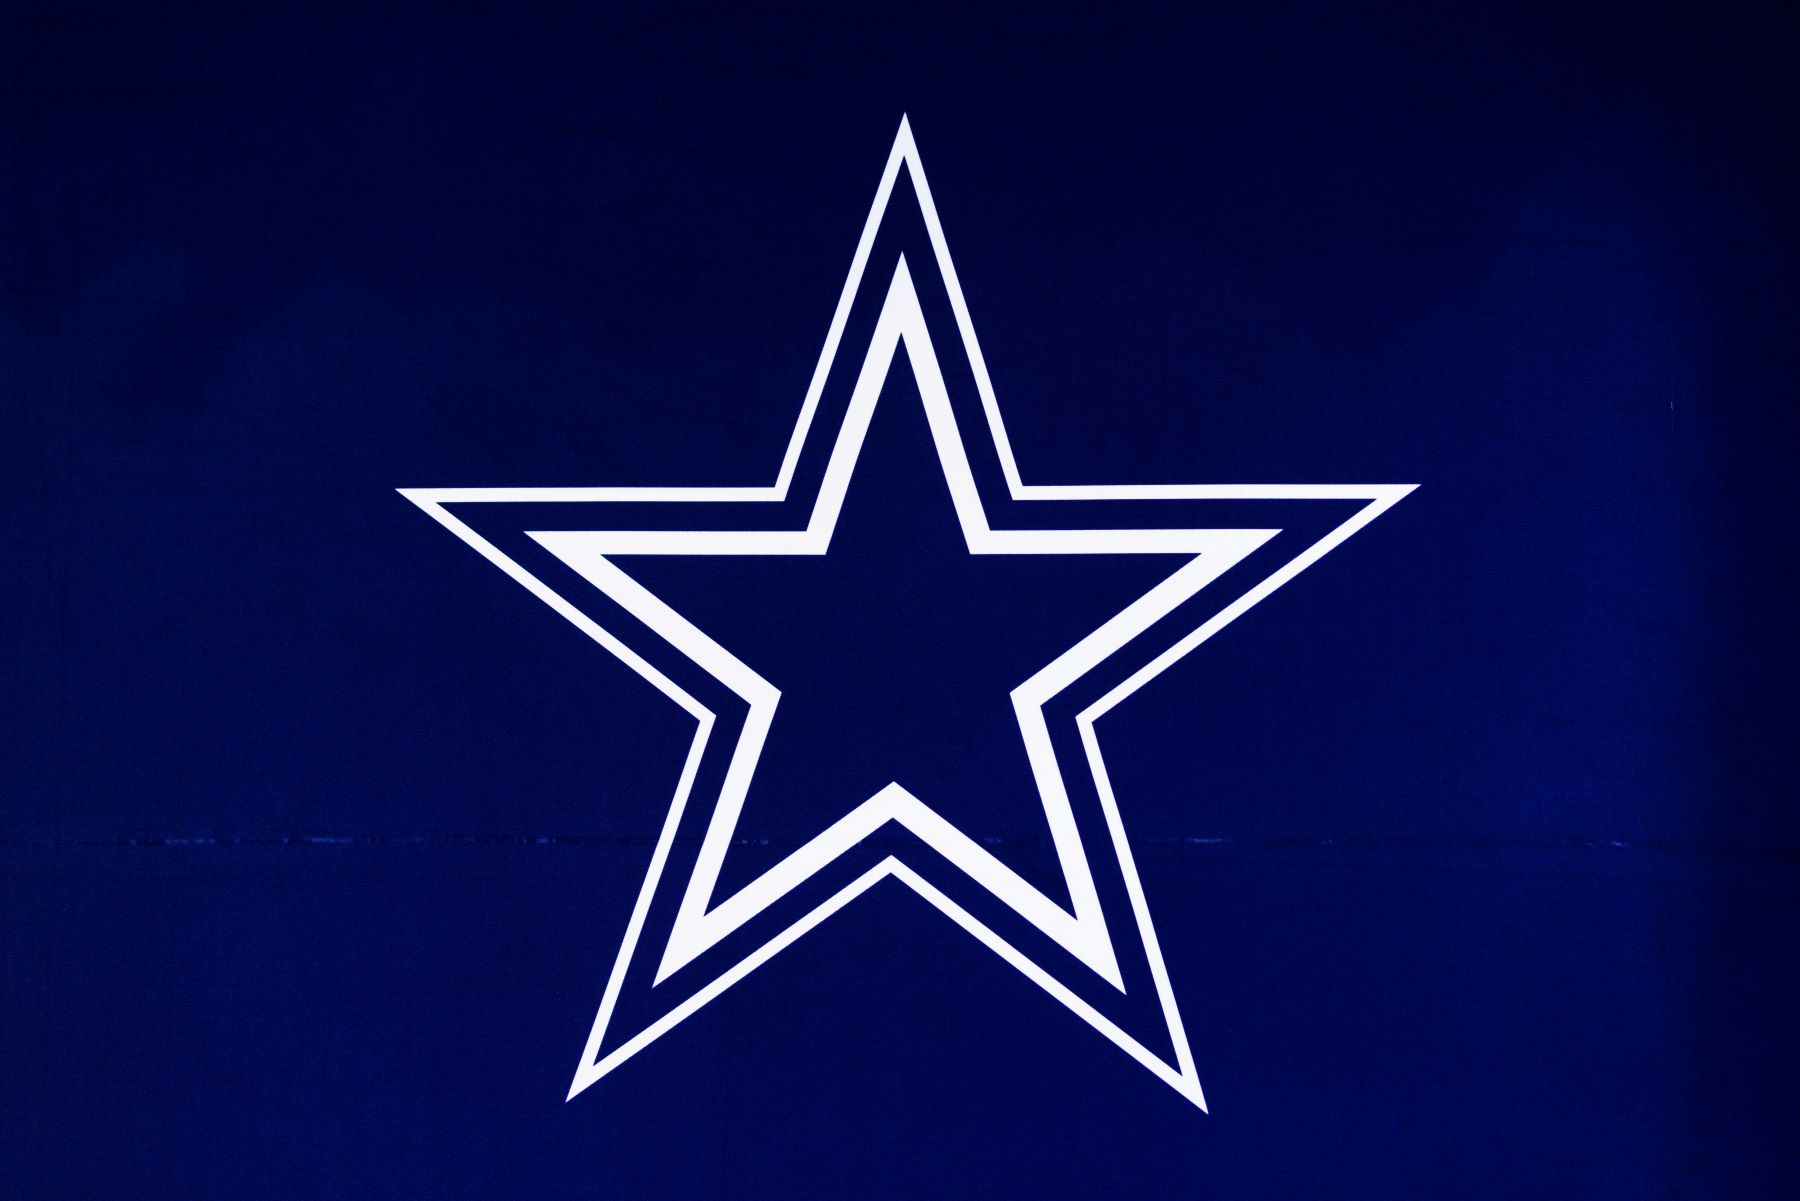 Dallas Cowboys logo seen at the Los Angeles Convention Center during the Super Bowl Experience